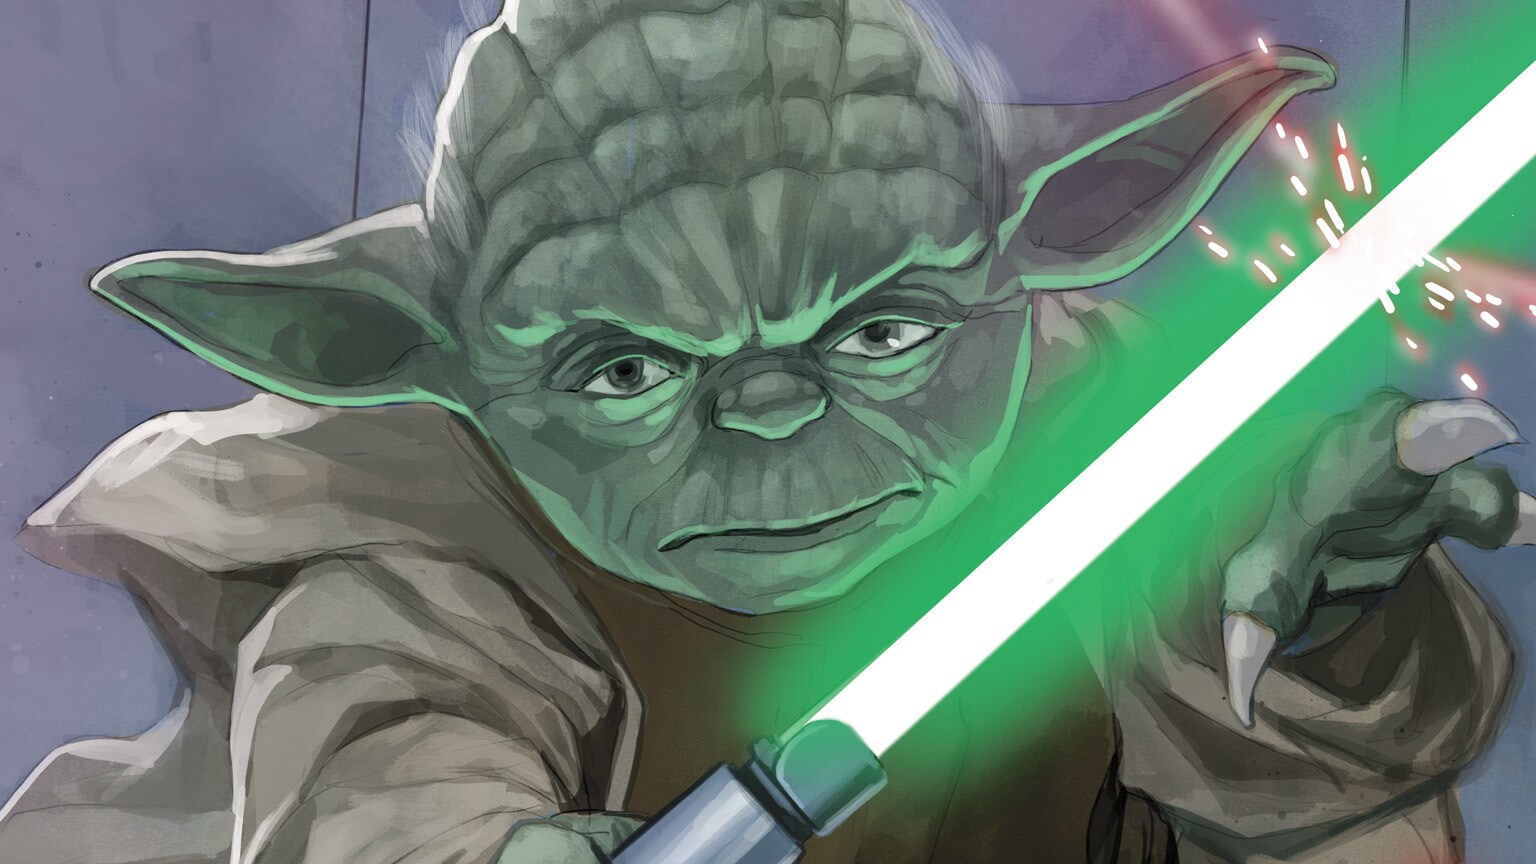 Yoda Begins a New Mission in Marvel’s Star Wars: Yoda #1 – Exclusive Preview